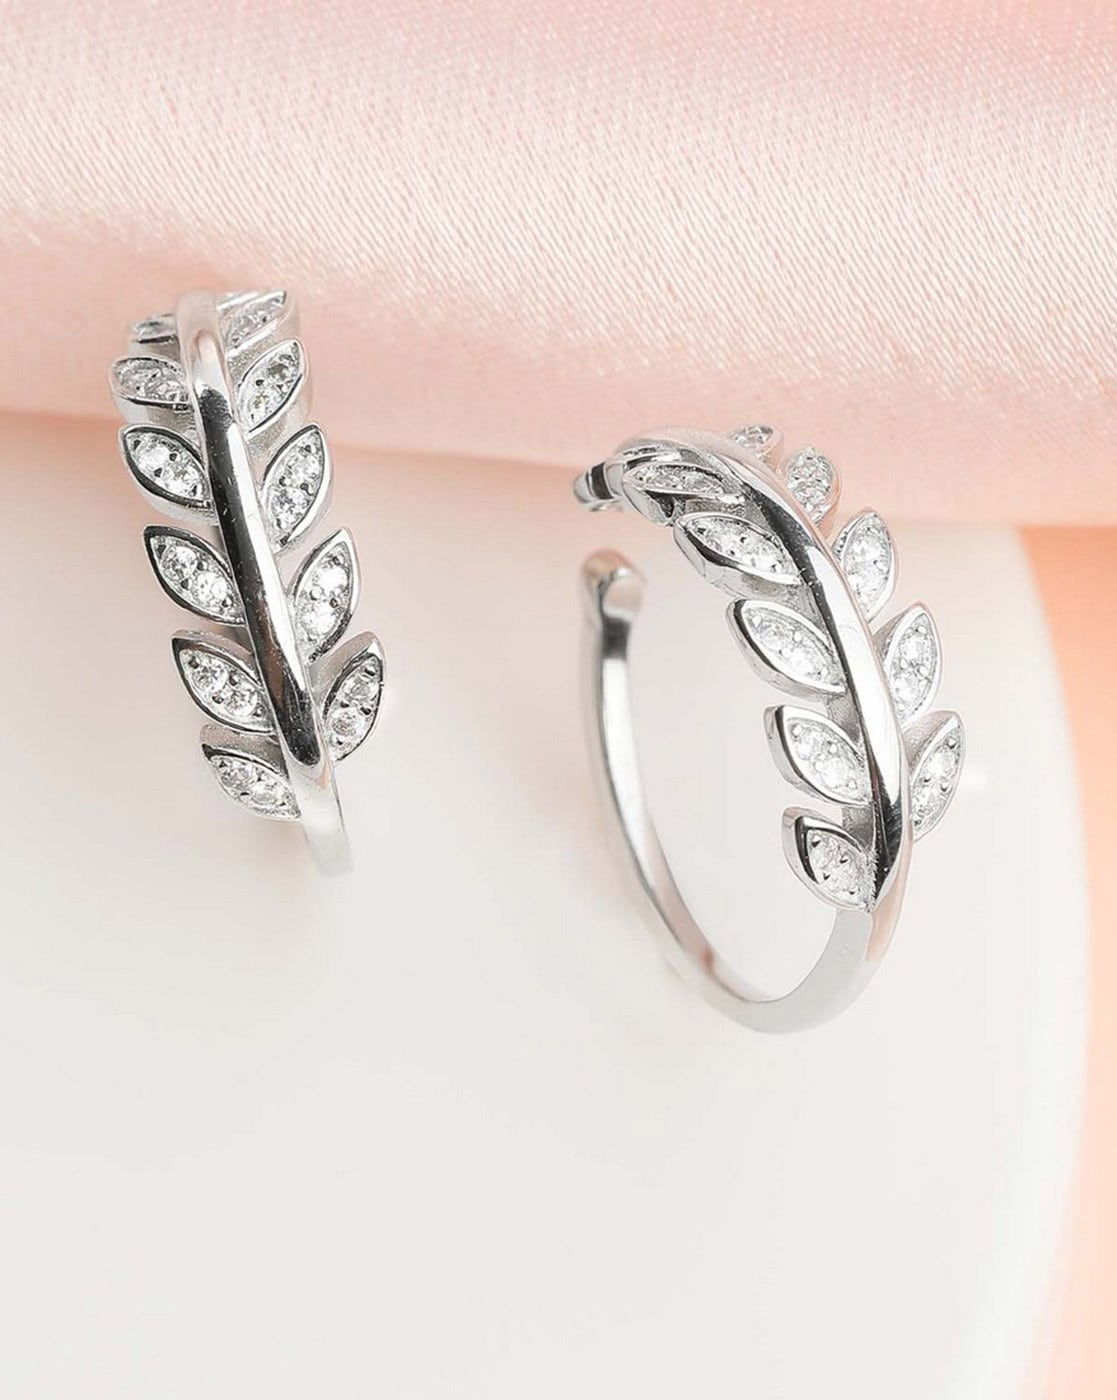 CLARA 925 Sterling Silver Ethnic Toe Rings Pair Size Adjustable Gift f